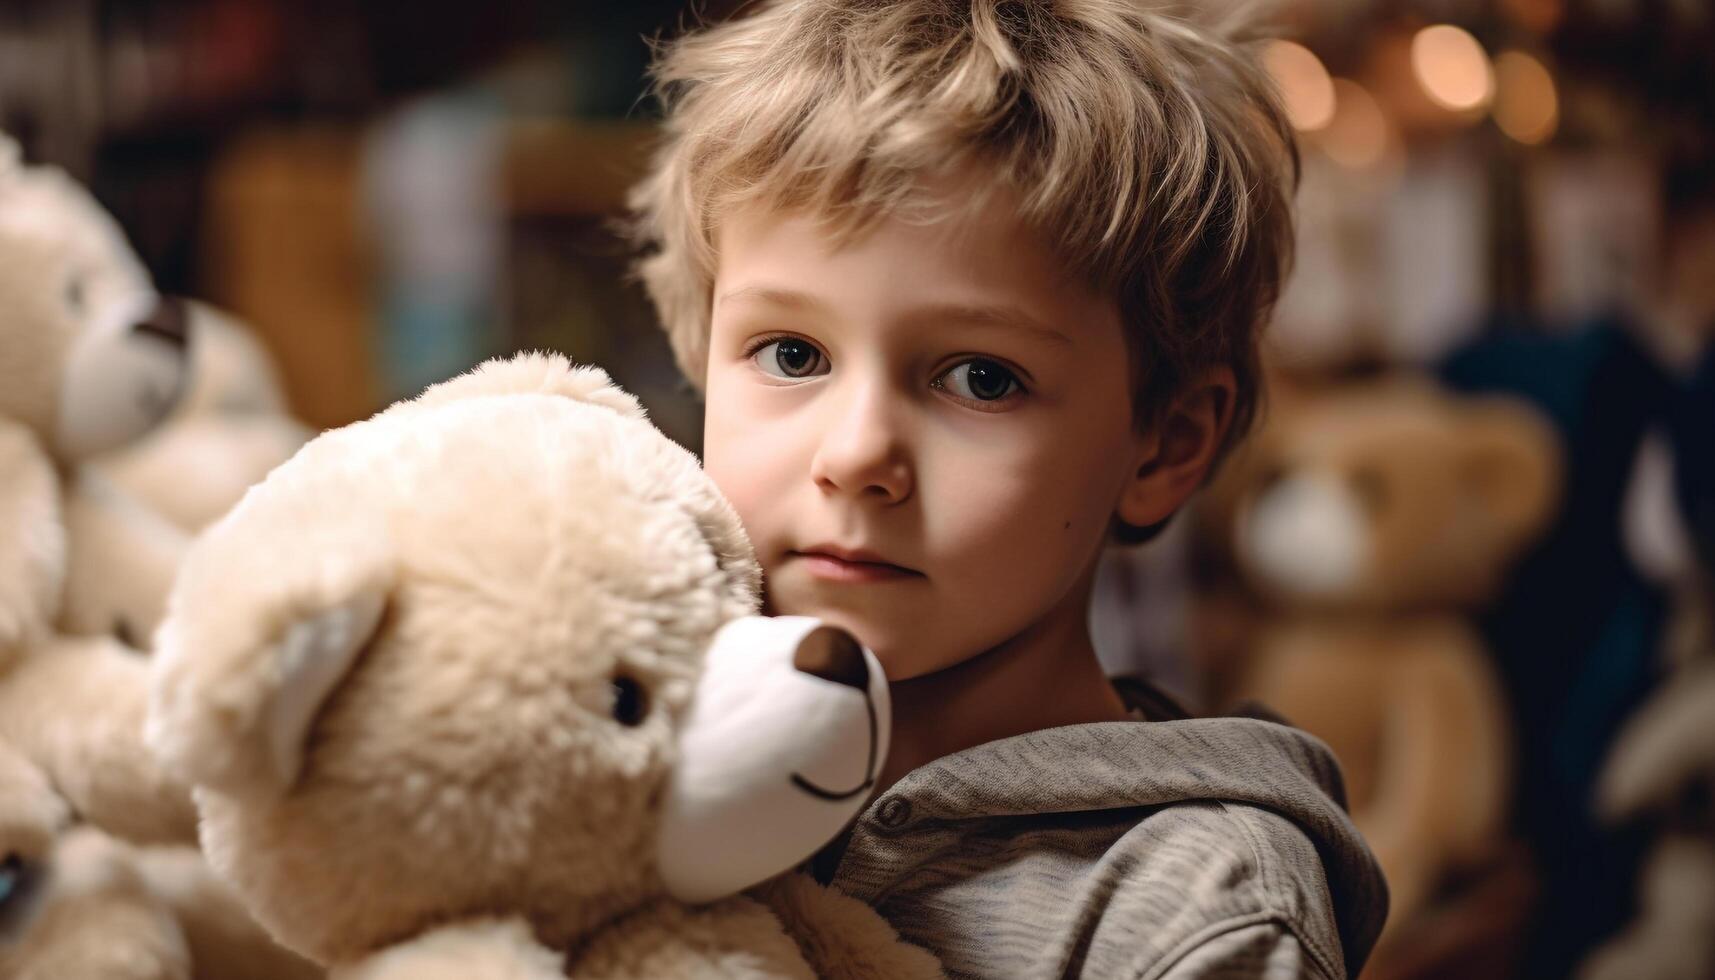 Cute toddler embraces teddy bear, surrounded by playful children indoors generated by AI photo